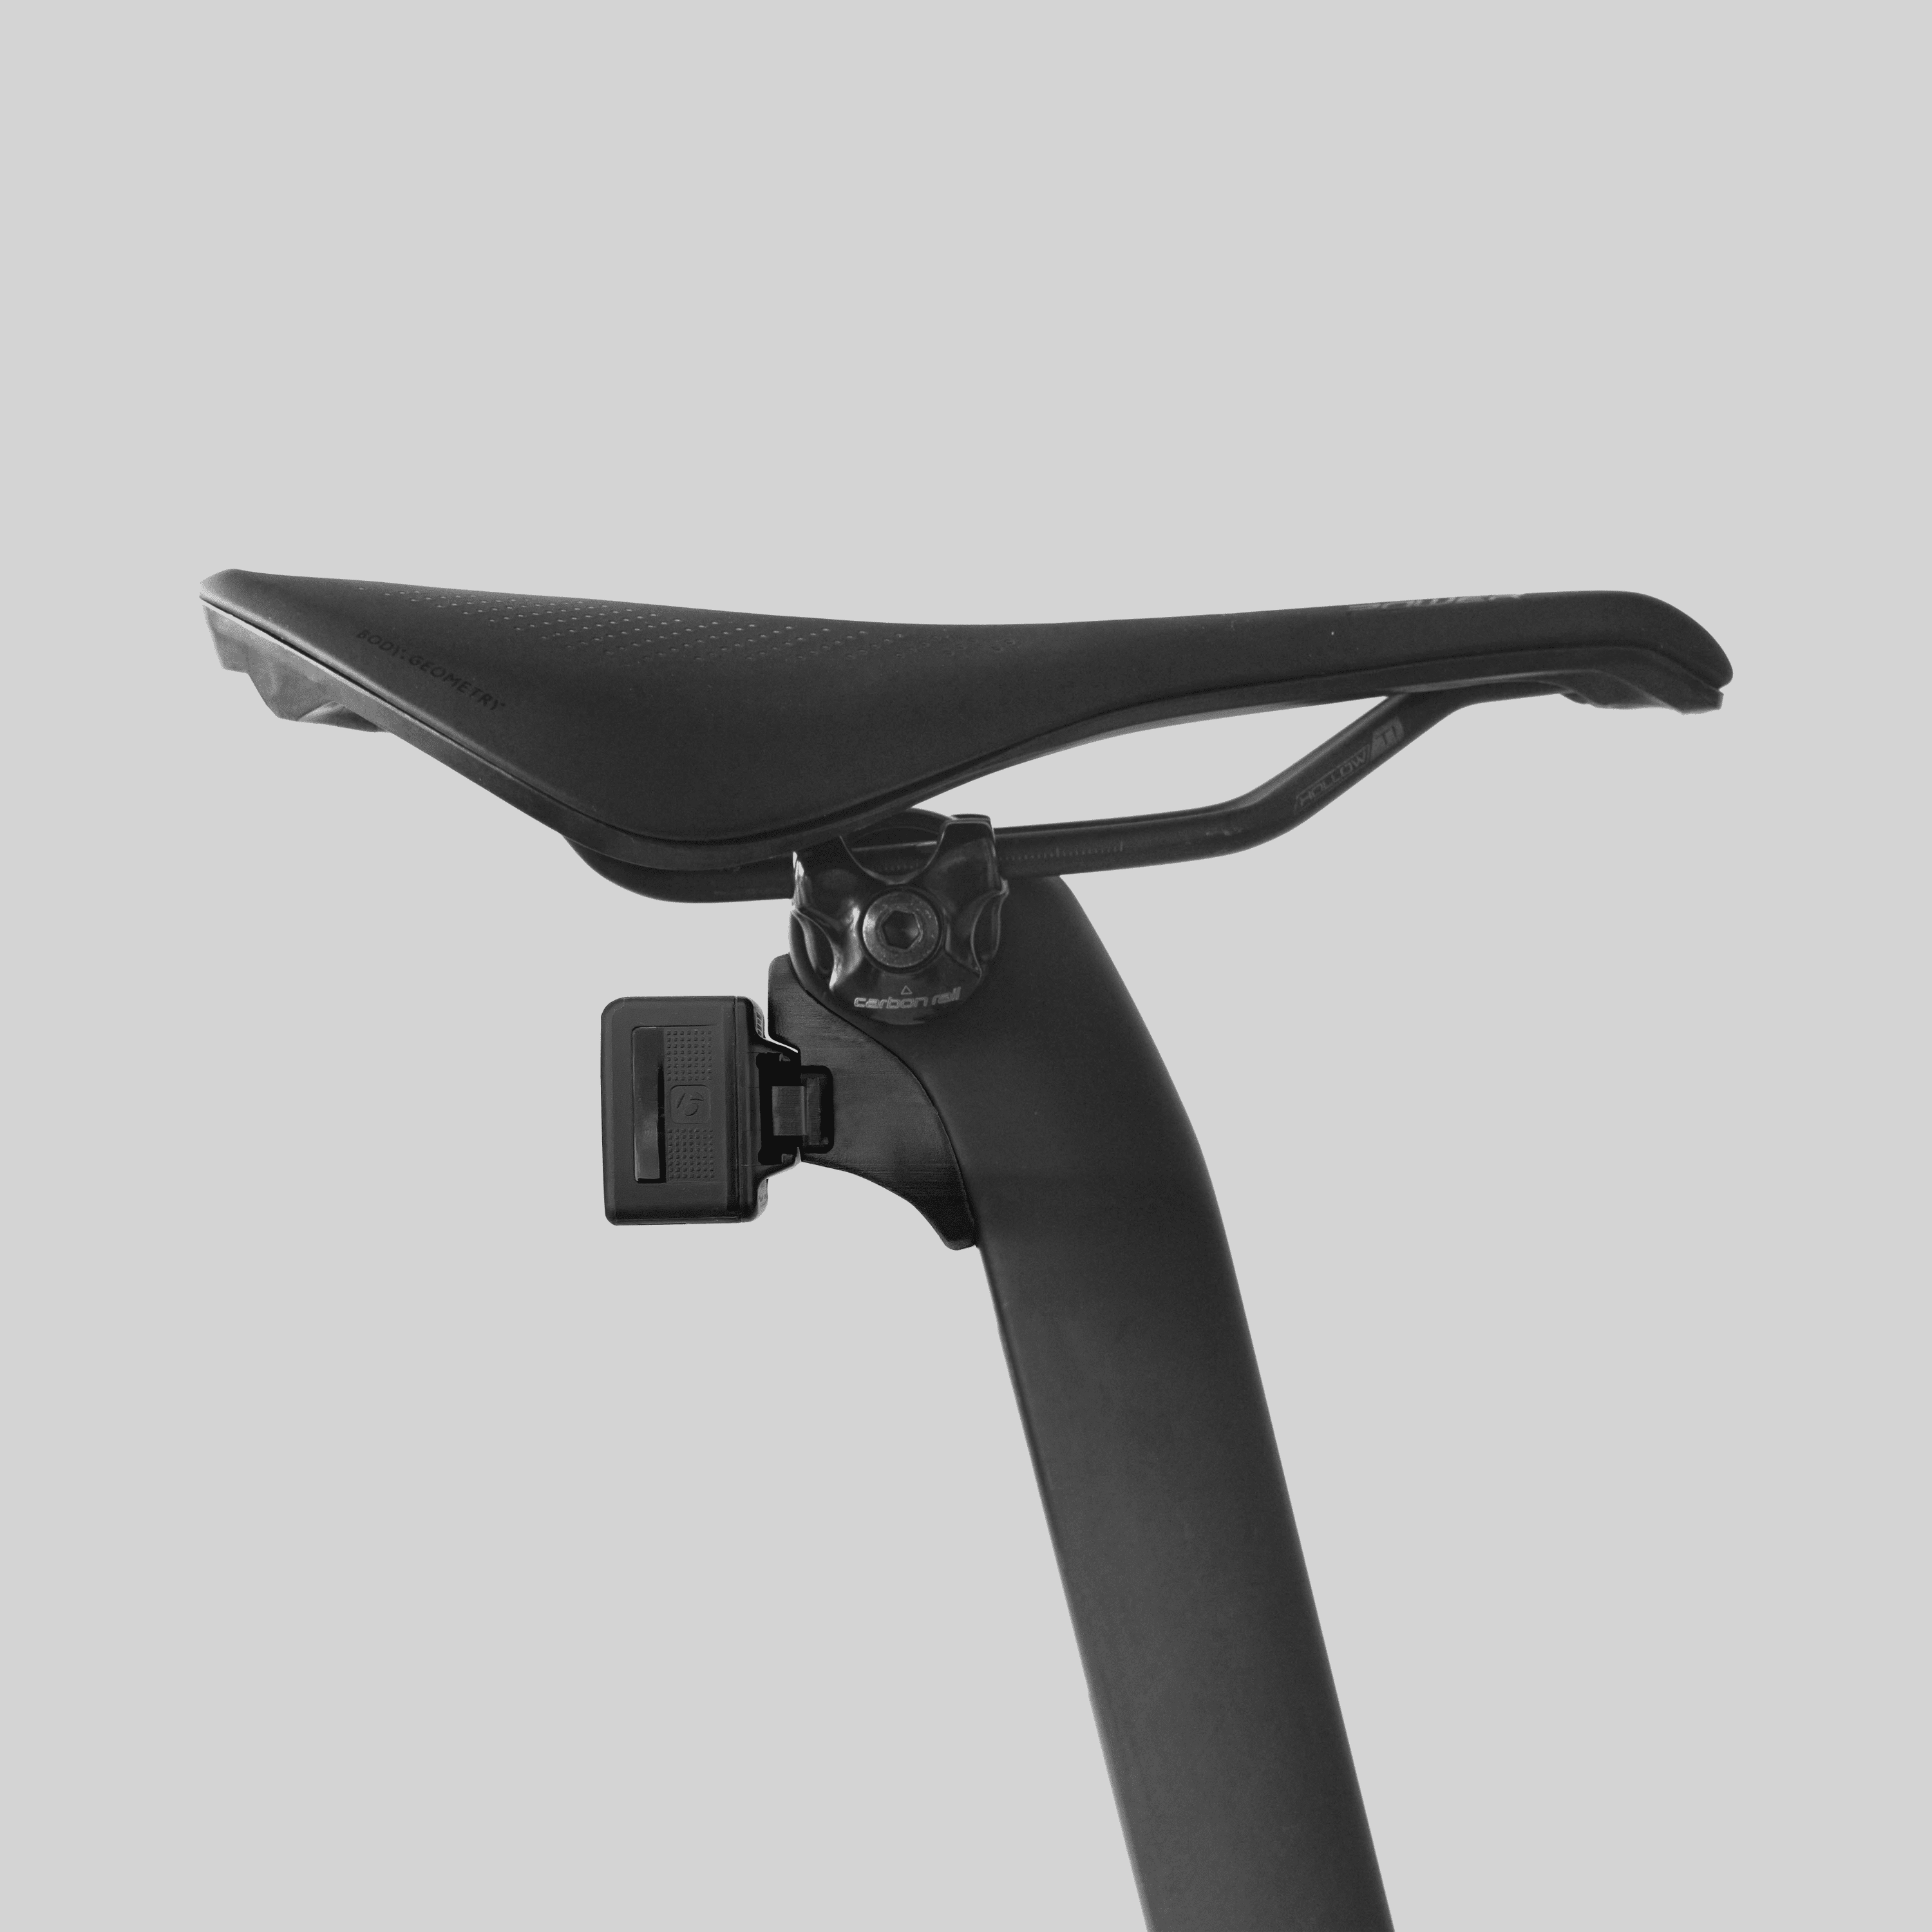 Bontrager Flare Mount for Specialized Tarmac SL7 Seatpost with DI2 Port, For seatpost with 2 cm setback